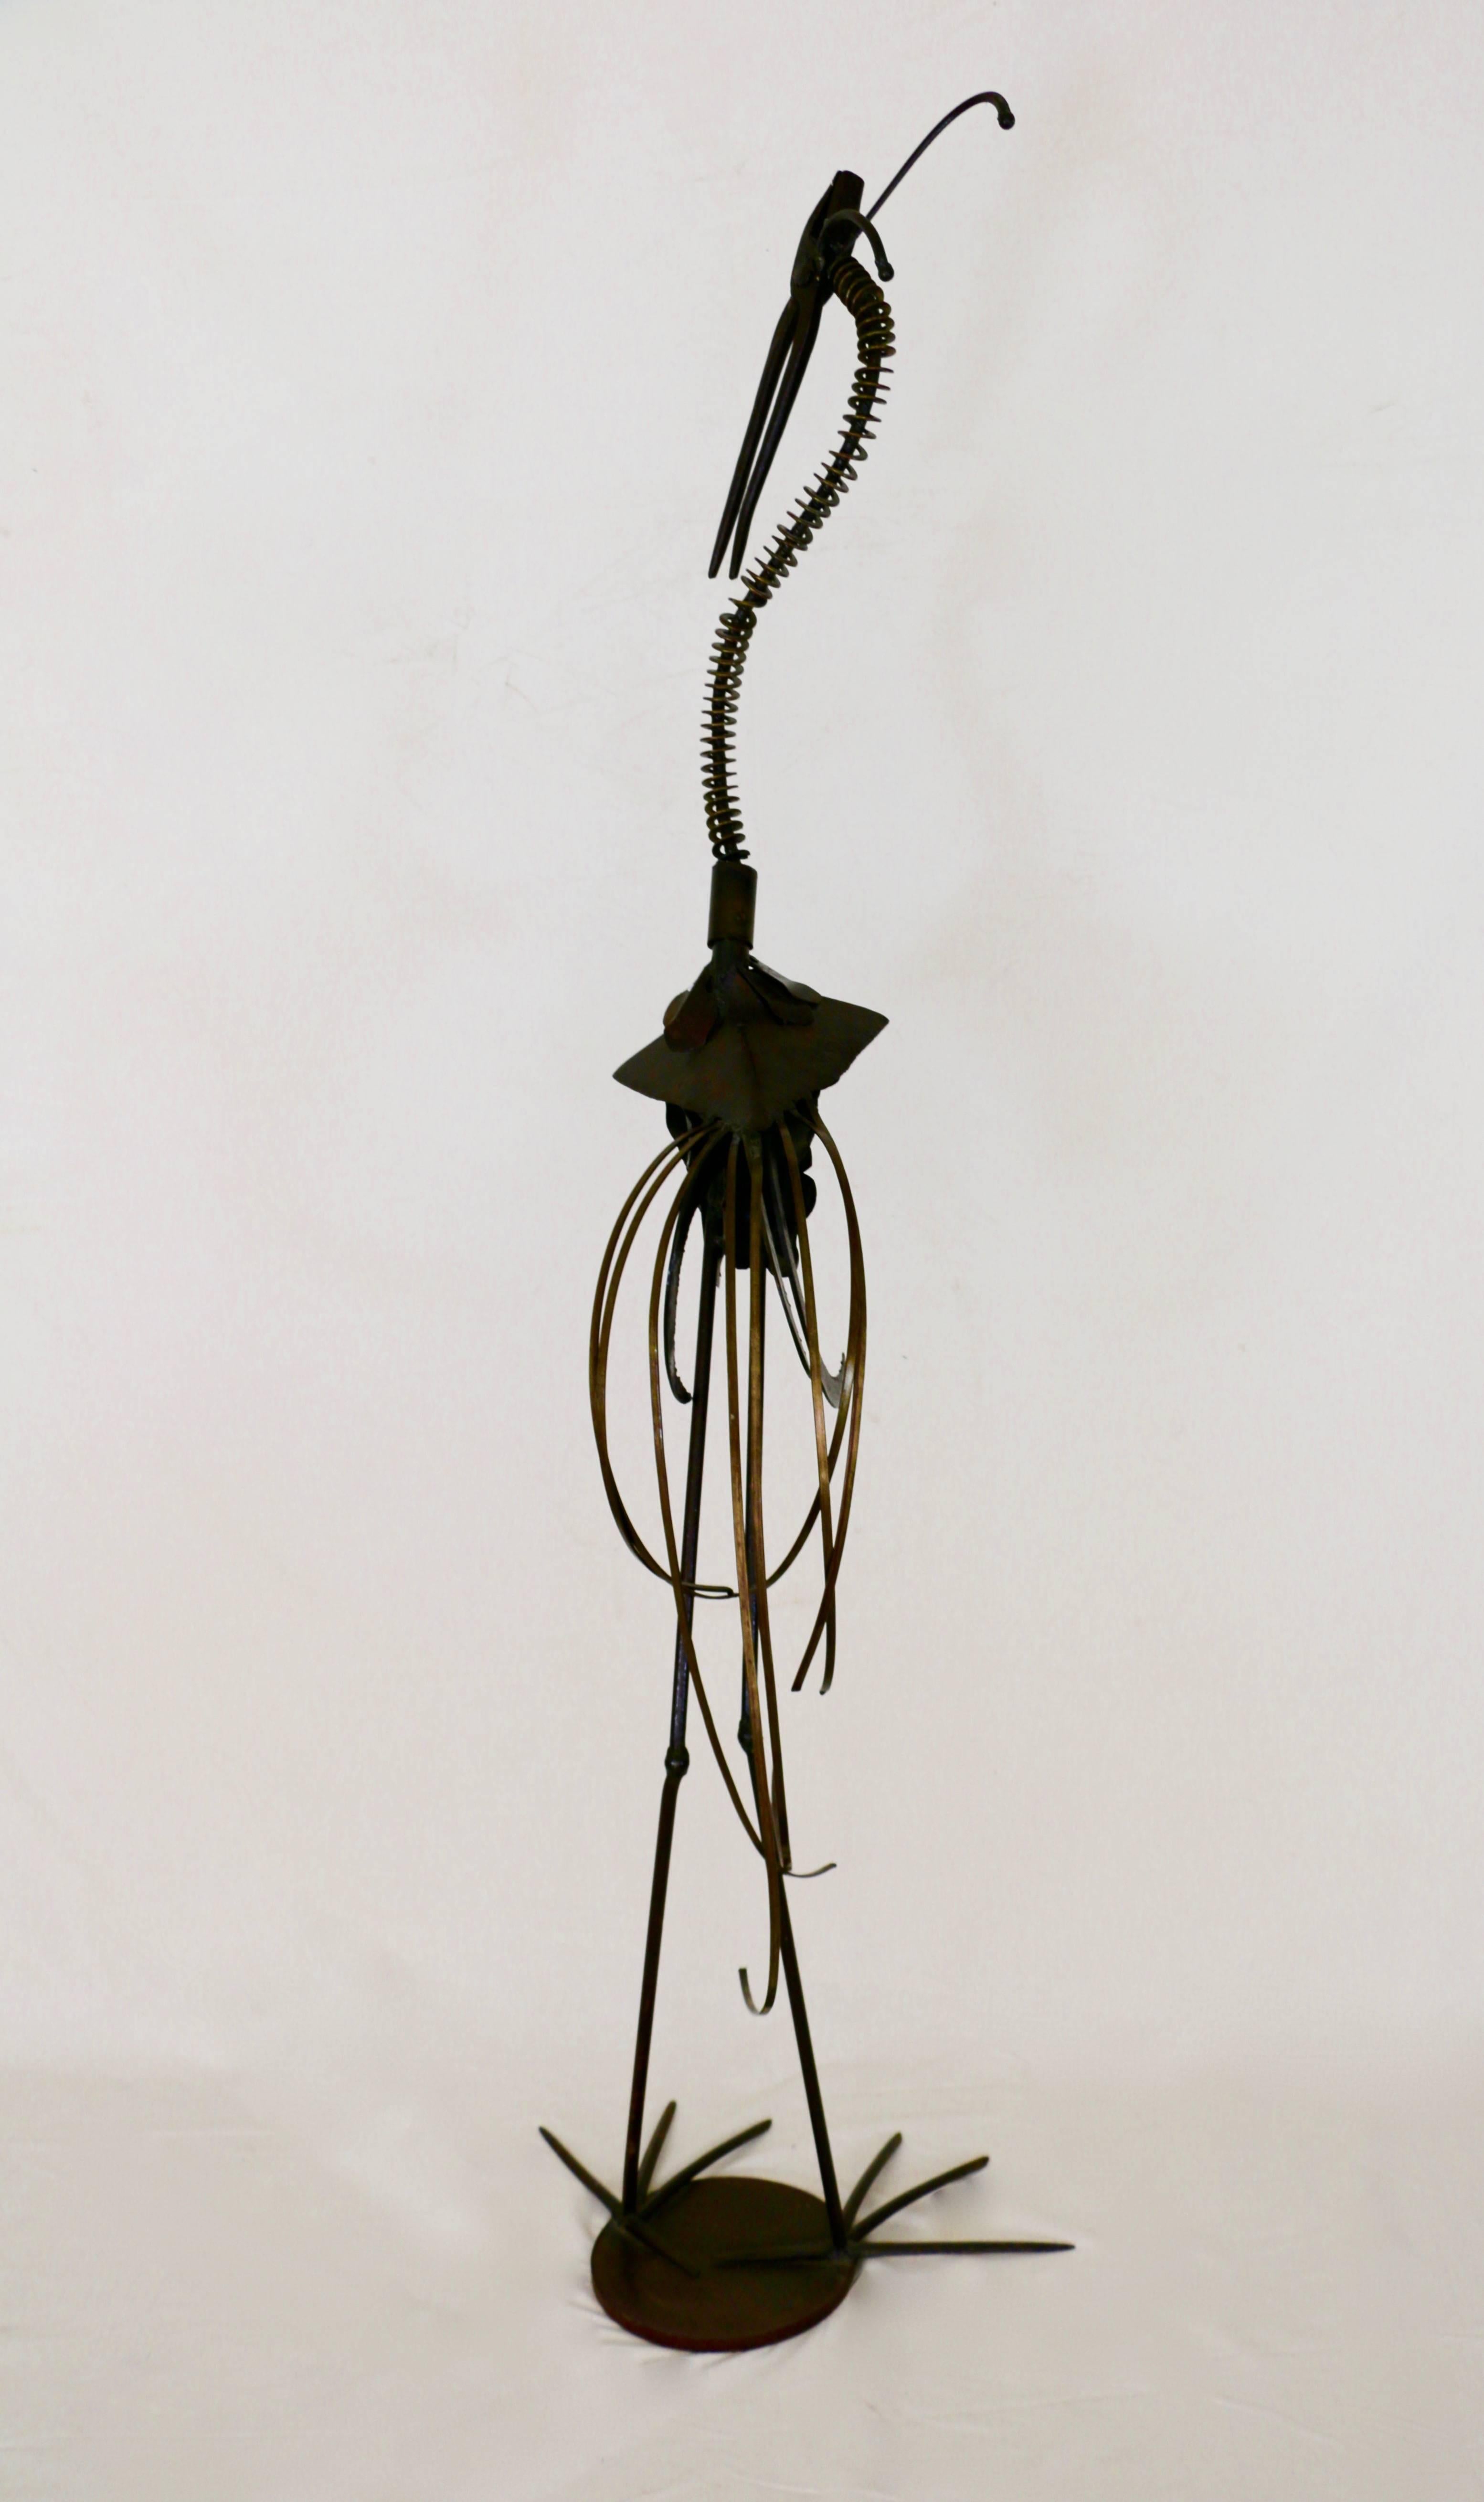 1970s French work.
Marabout sculpture in wrought iron and old tools (see pictures).
Folk Art.